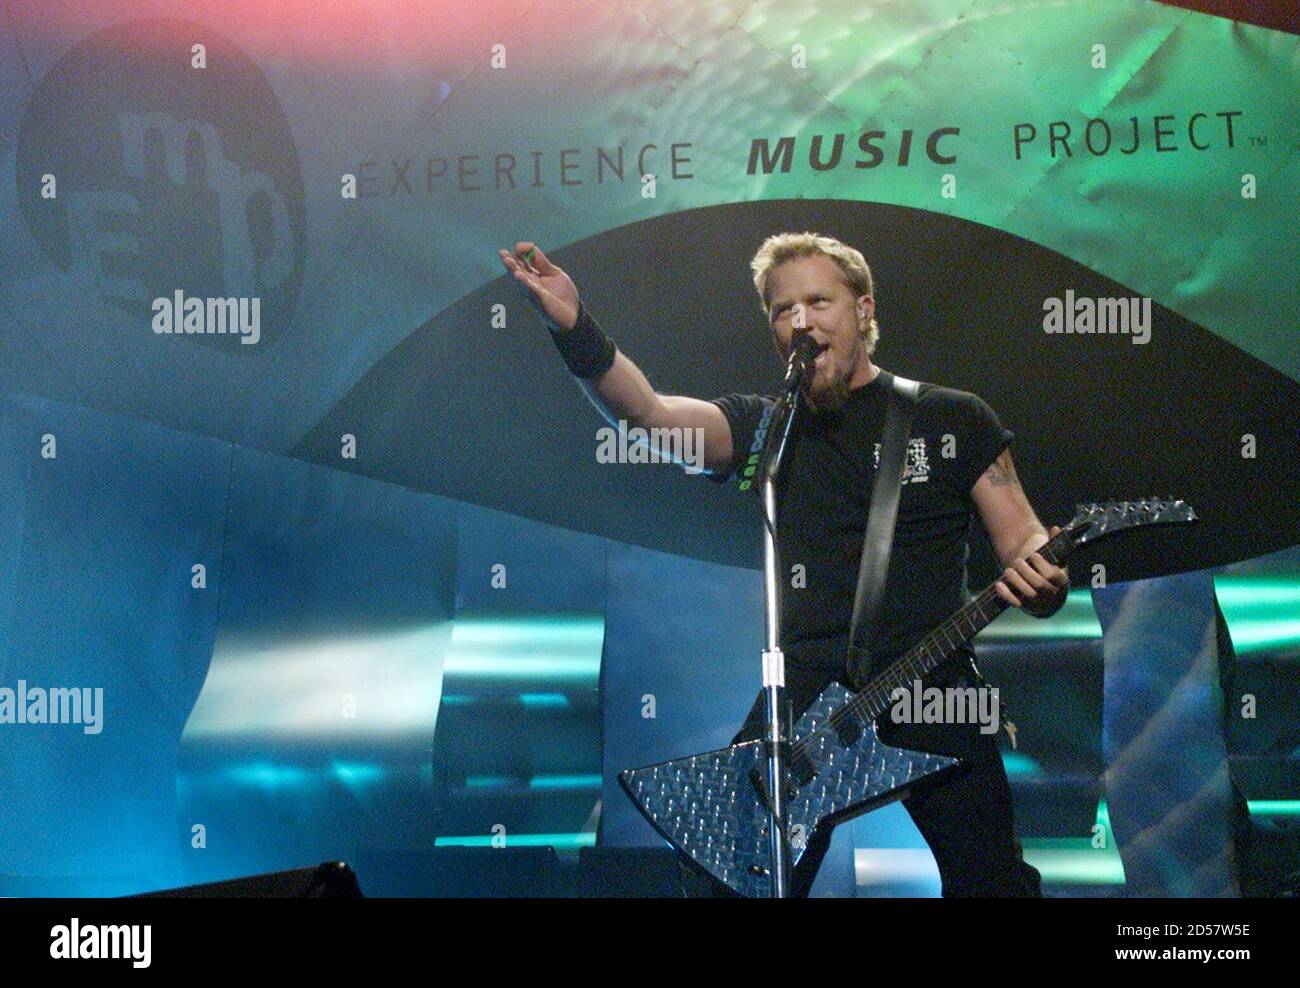 Metallica lead singer and guitarist James Hetfield before a soldout Memorial Stadium crowd as the headline act on the opening night of the Experience Project (EMP) in Seattle, June 23.